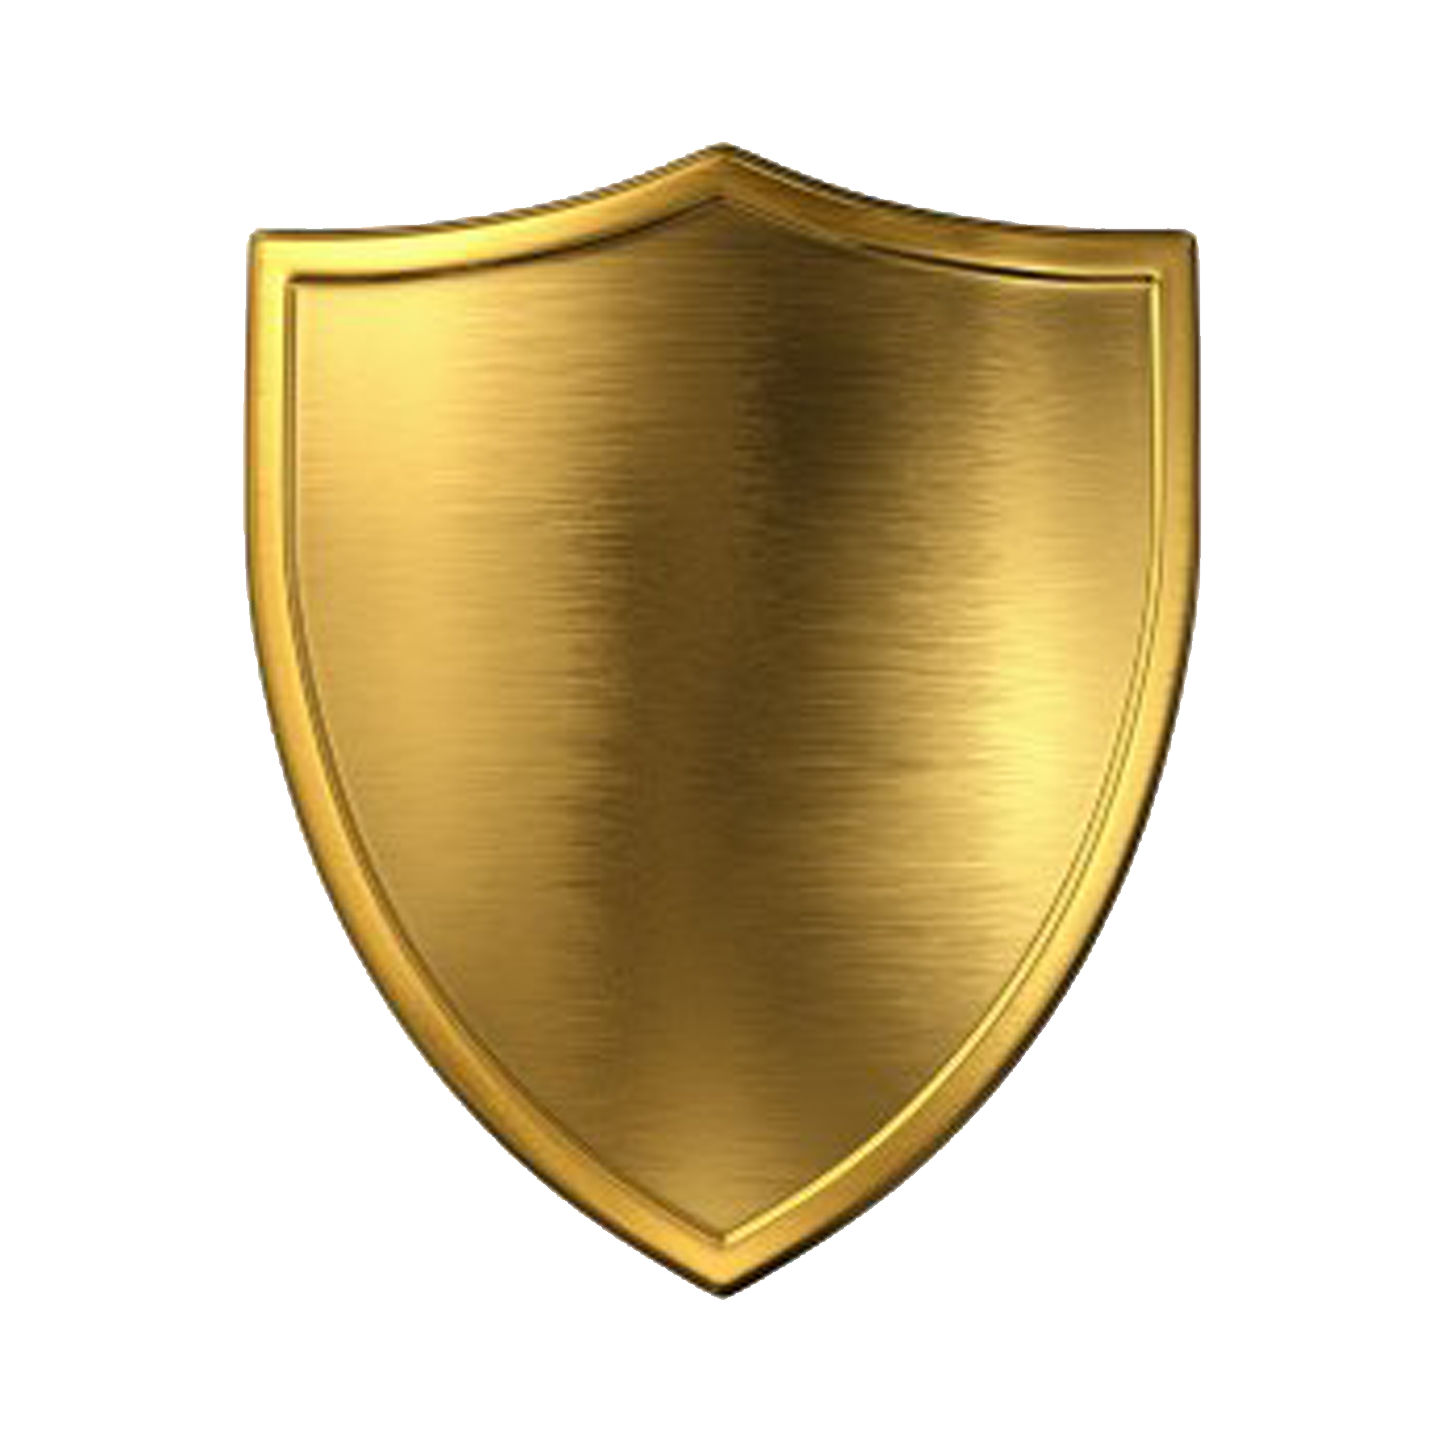 Download PNG image: gold shield PNG image, free picture download